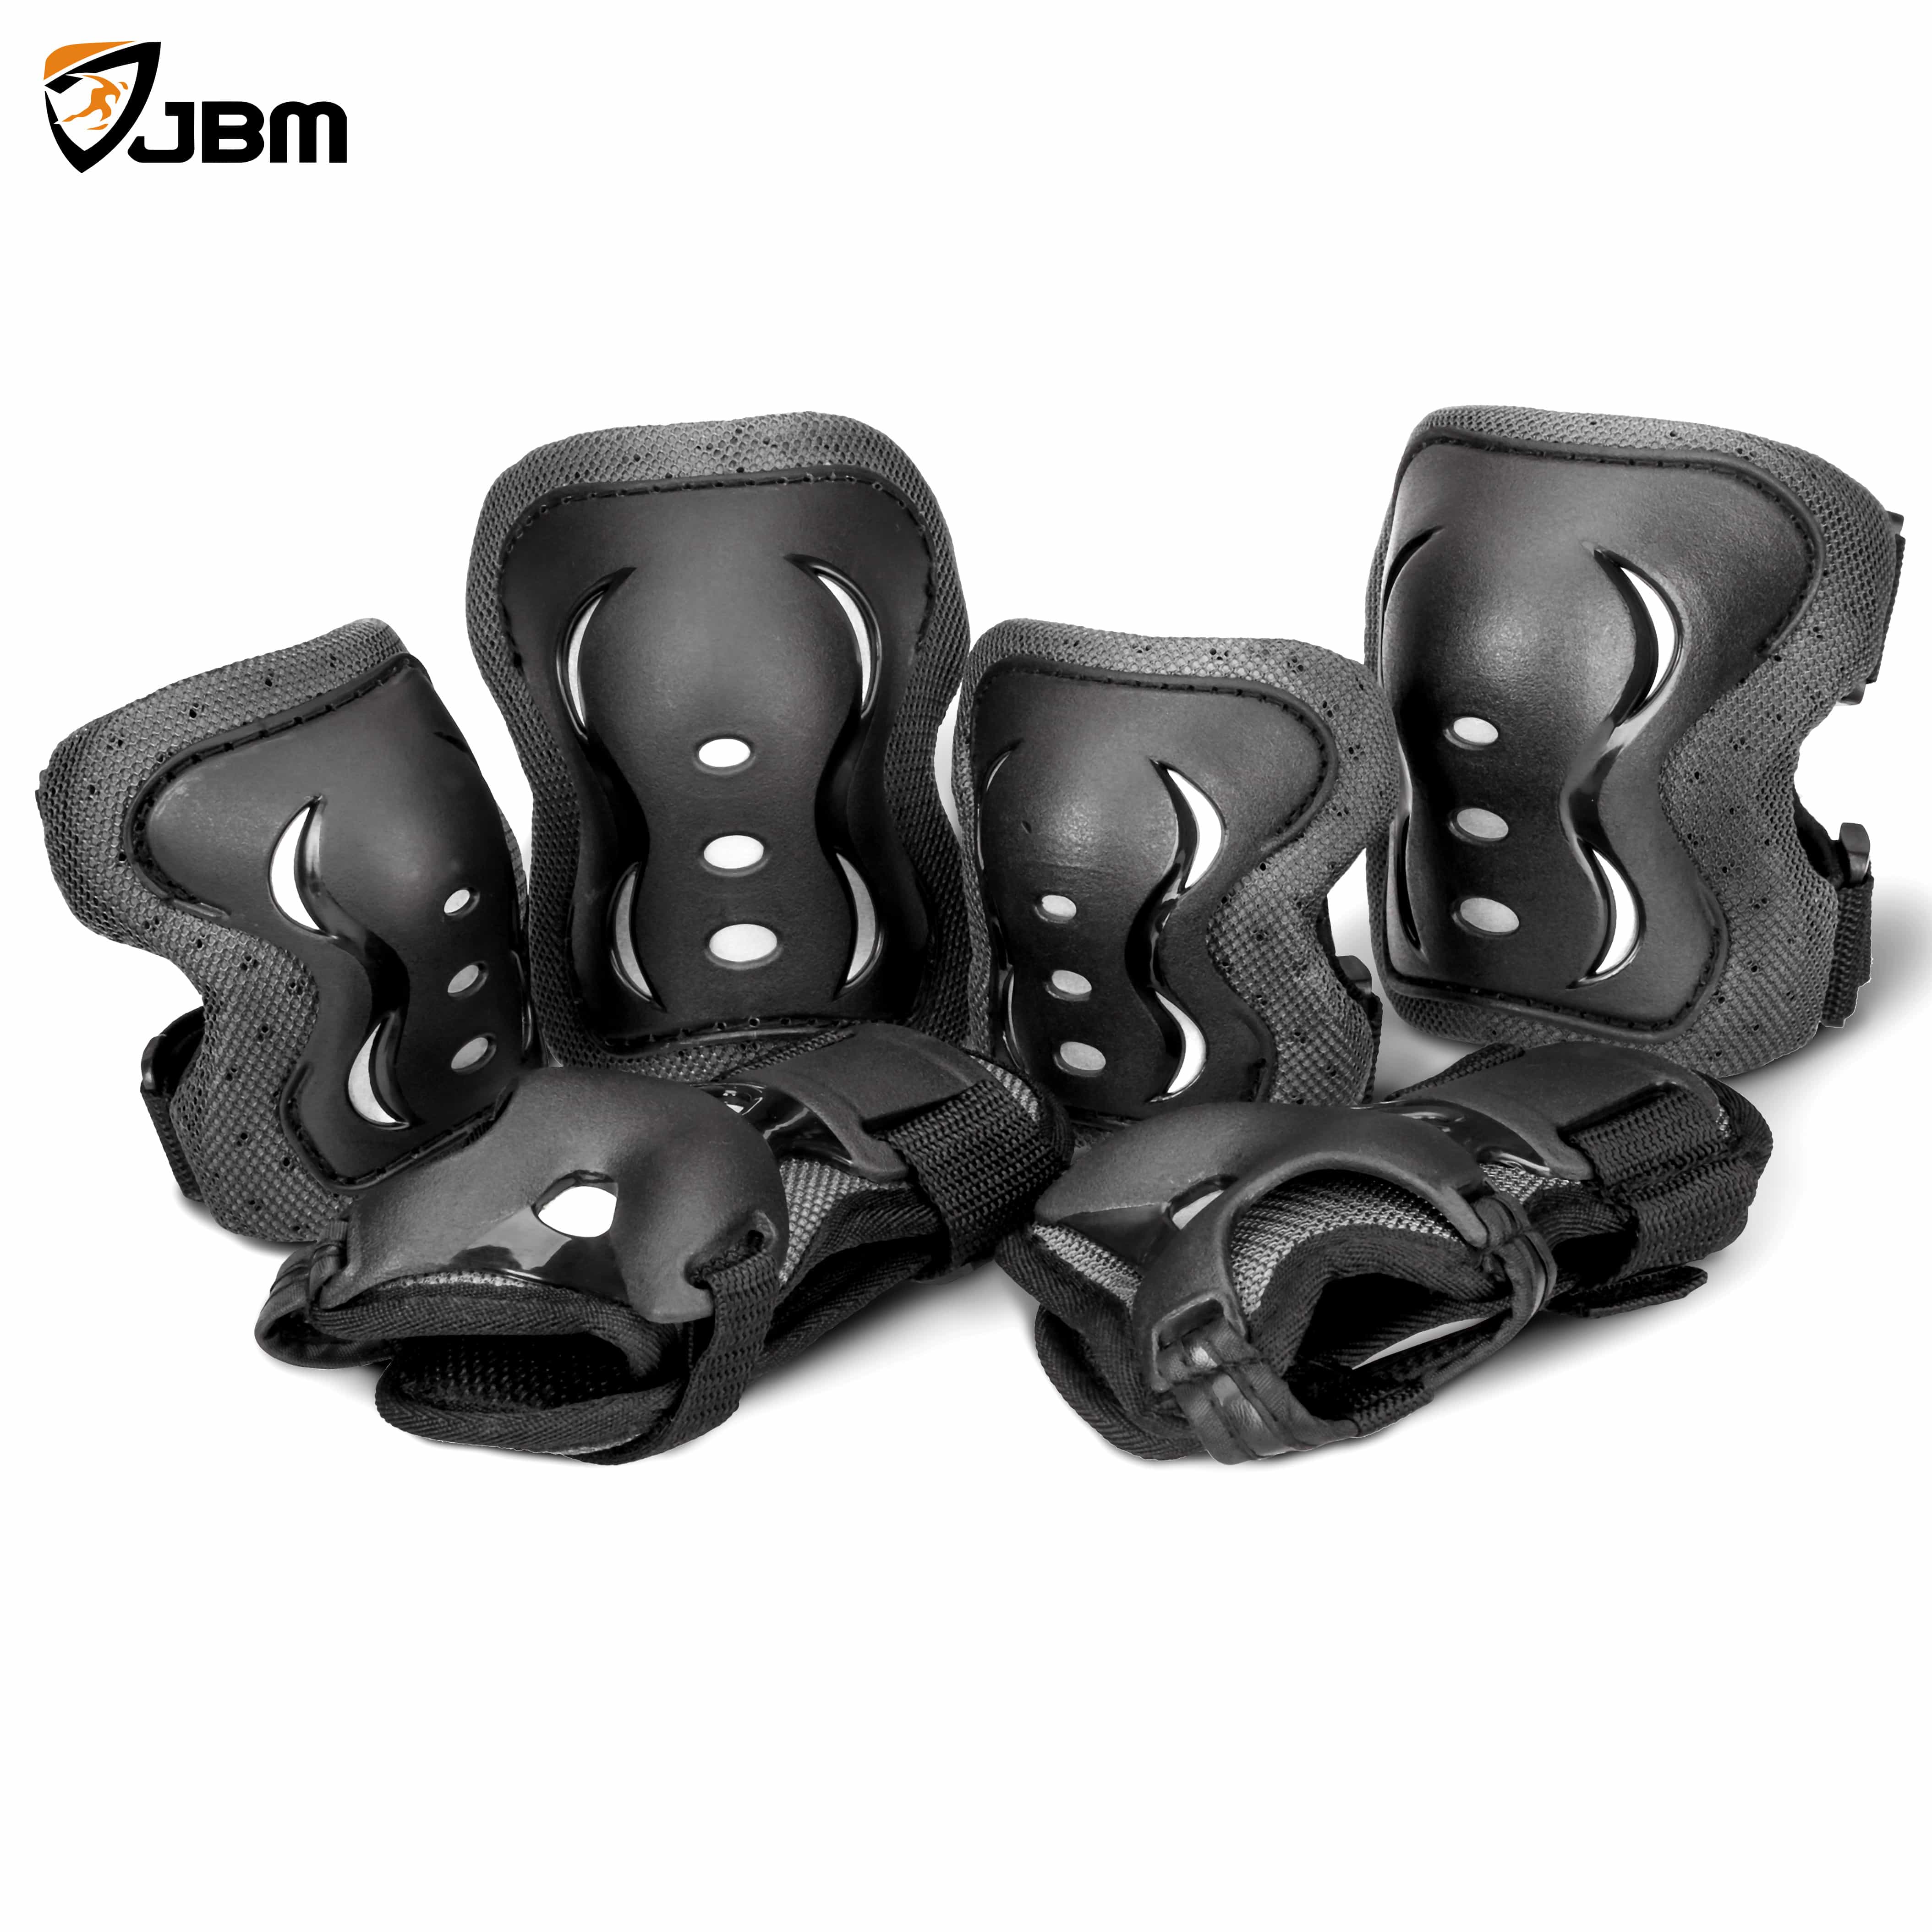 JBM Child & Adults Rider Series Protection Gear Set for Multi Sports  Scooter, Skateboarding, Roller Skating, Protection for Beginner to  Advanced